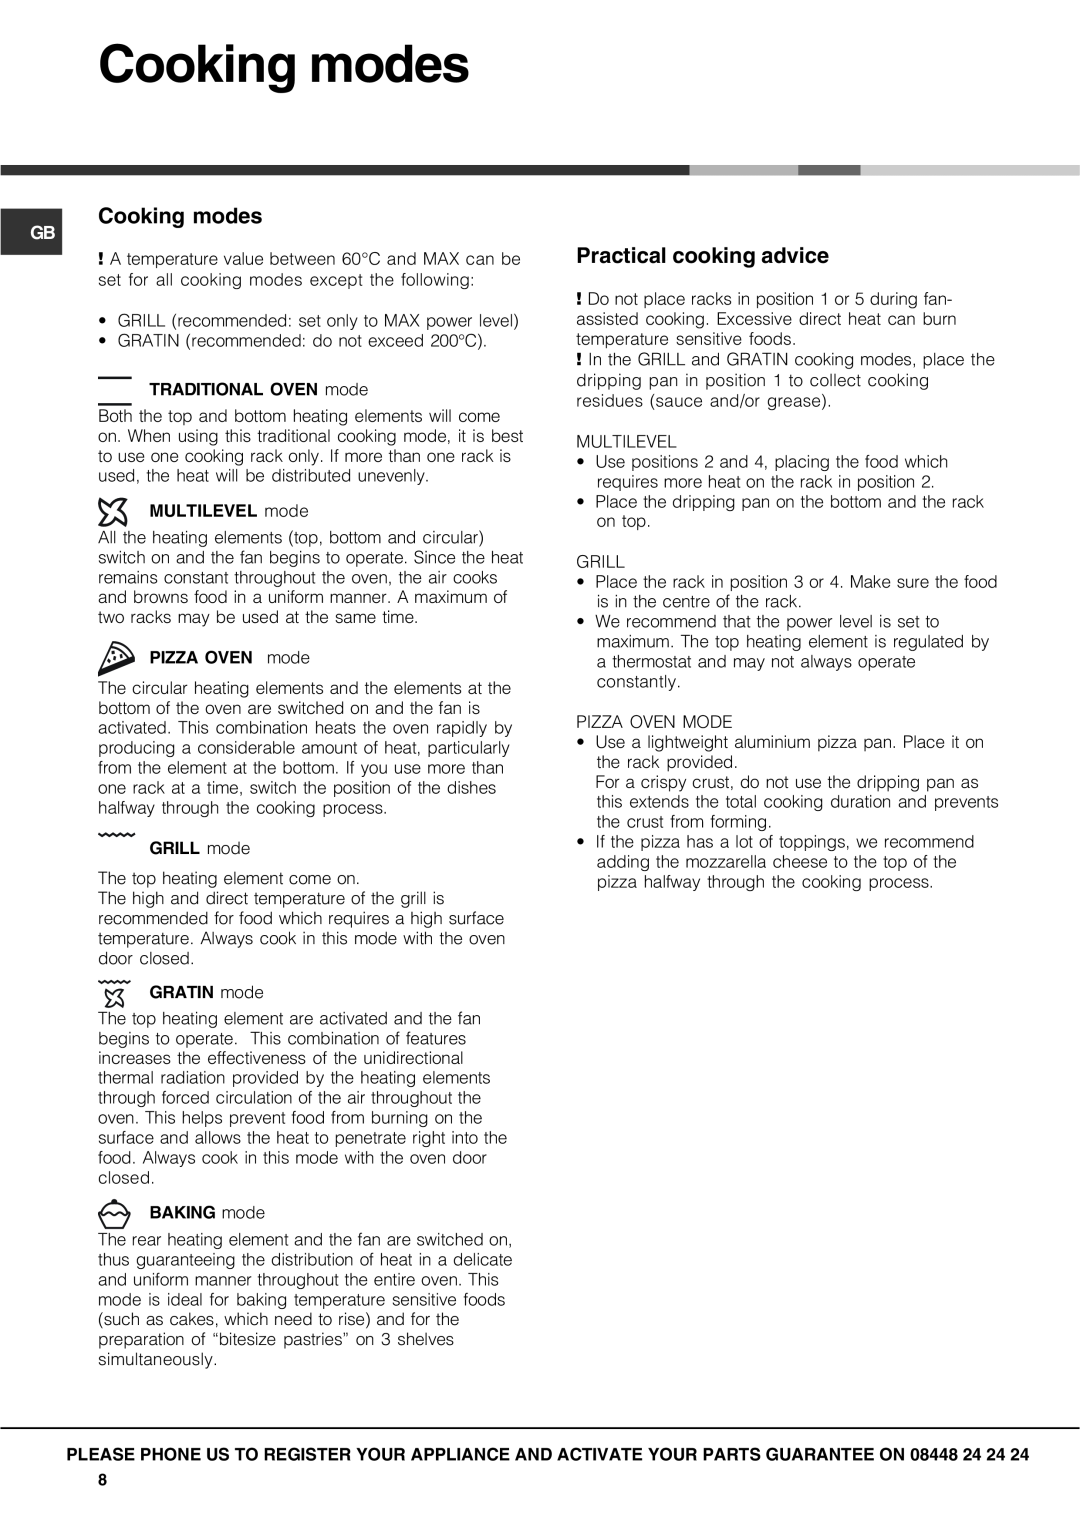 Hotpoint SX Cooking modes, TRADITIONAL OVEN mode, MULTILEVEL mode, PIZZA OVEN mode, GRILL mode, GRATIN mode, BAKING mode 